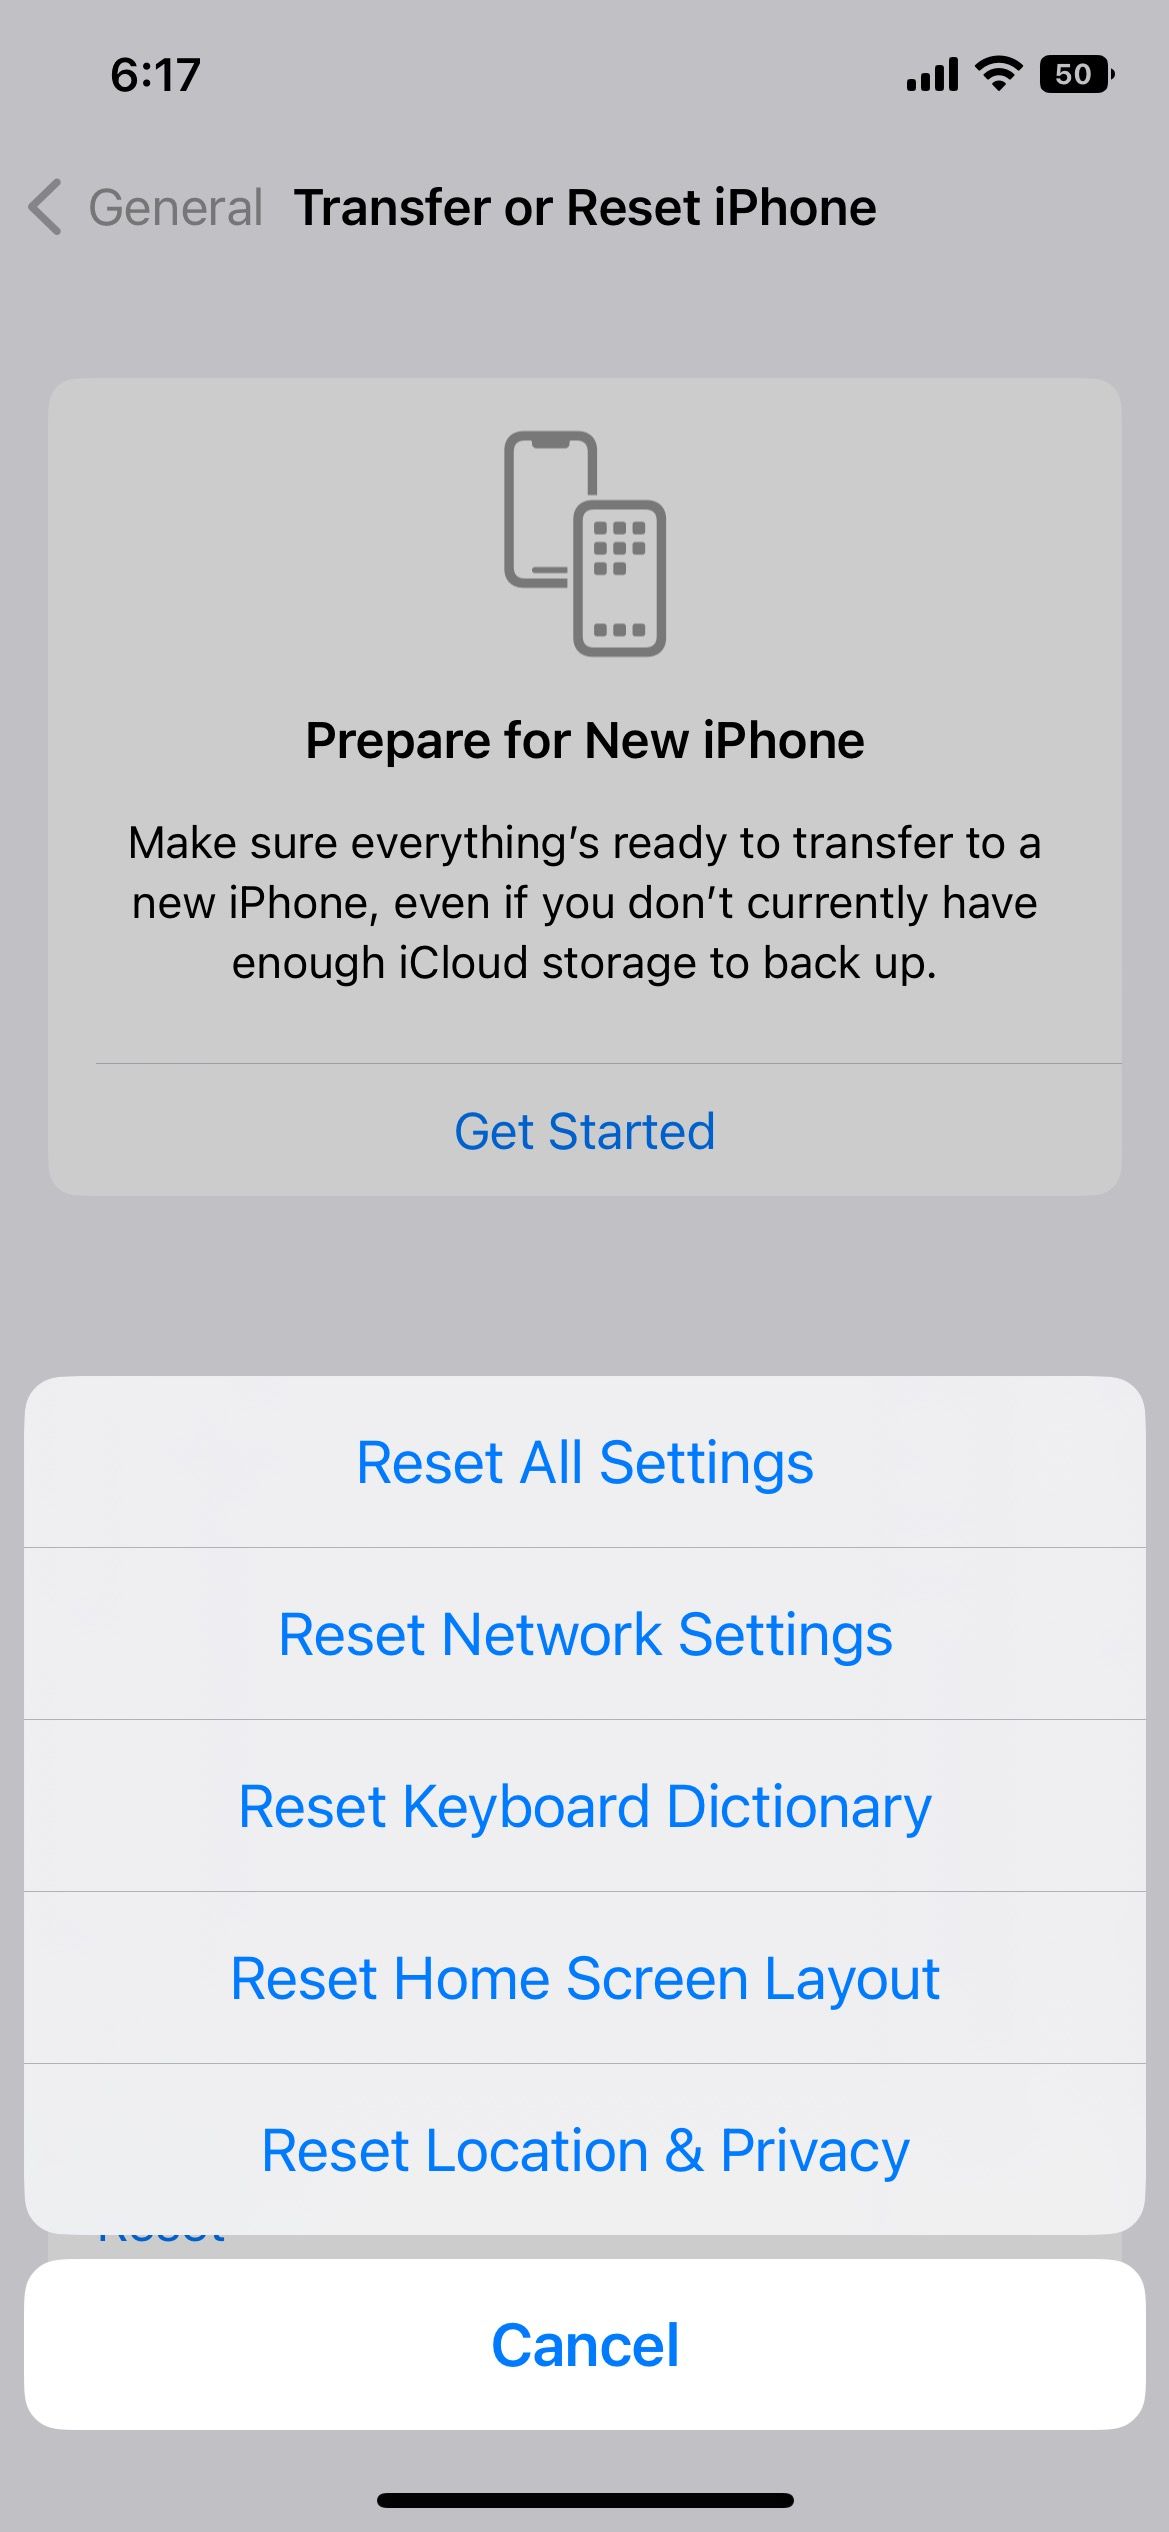 iPhone resetting options